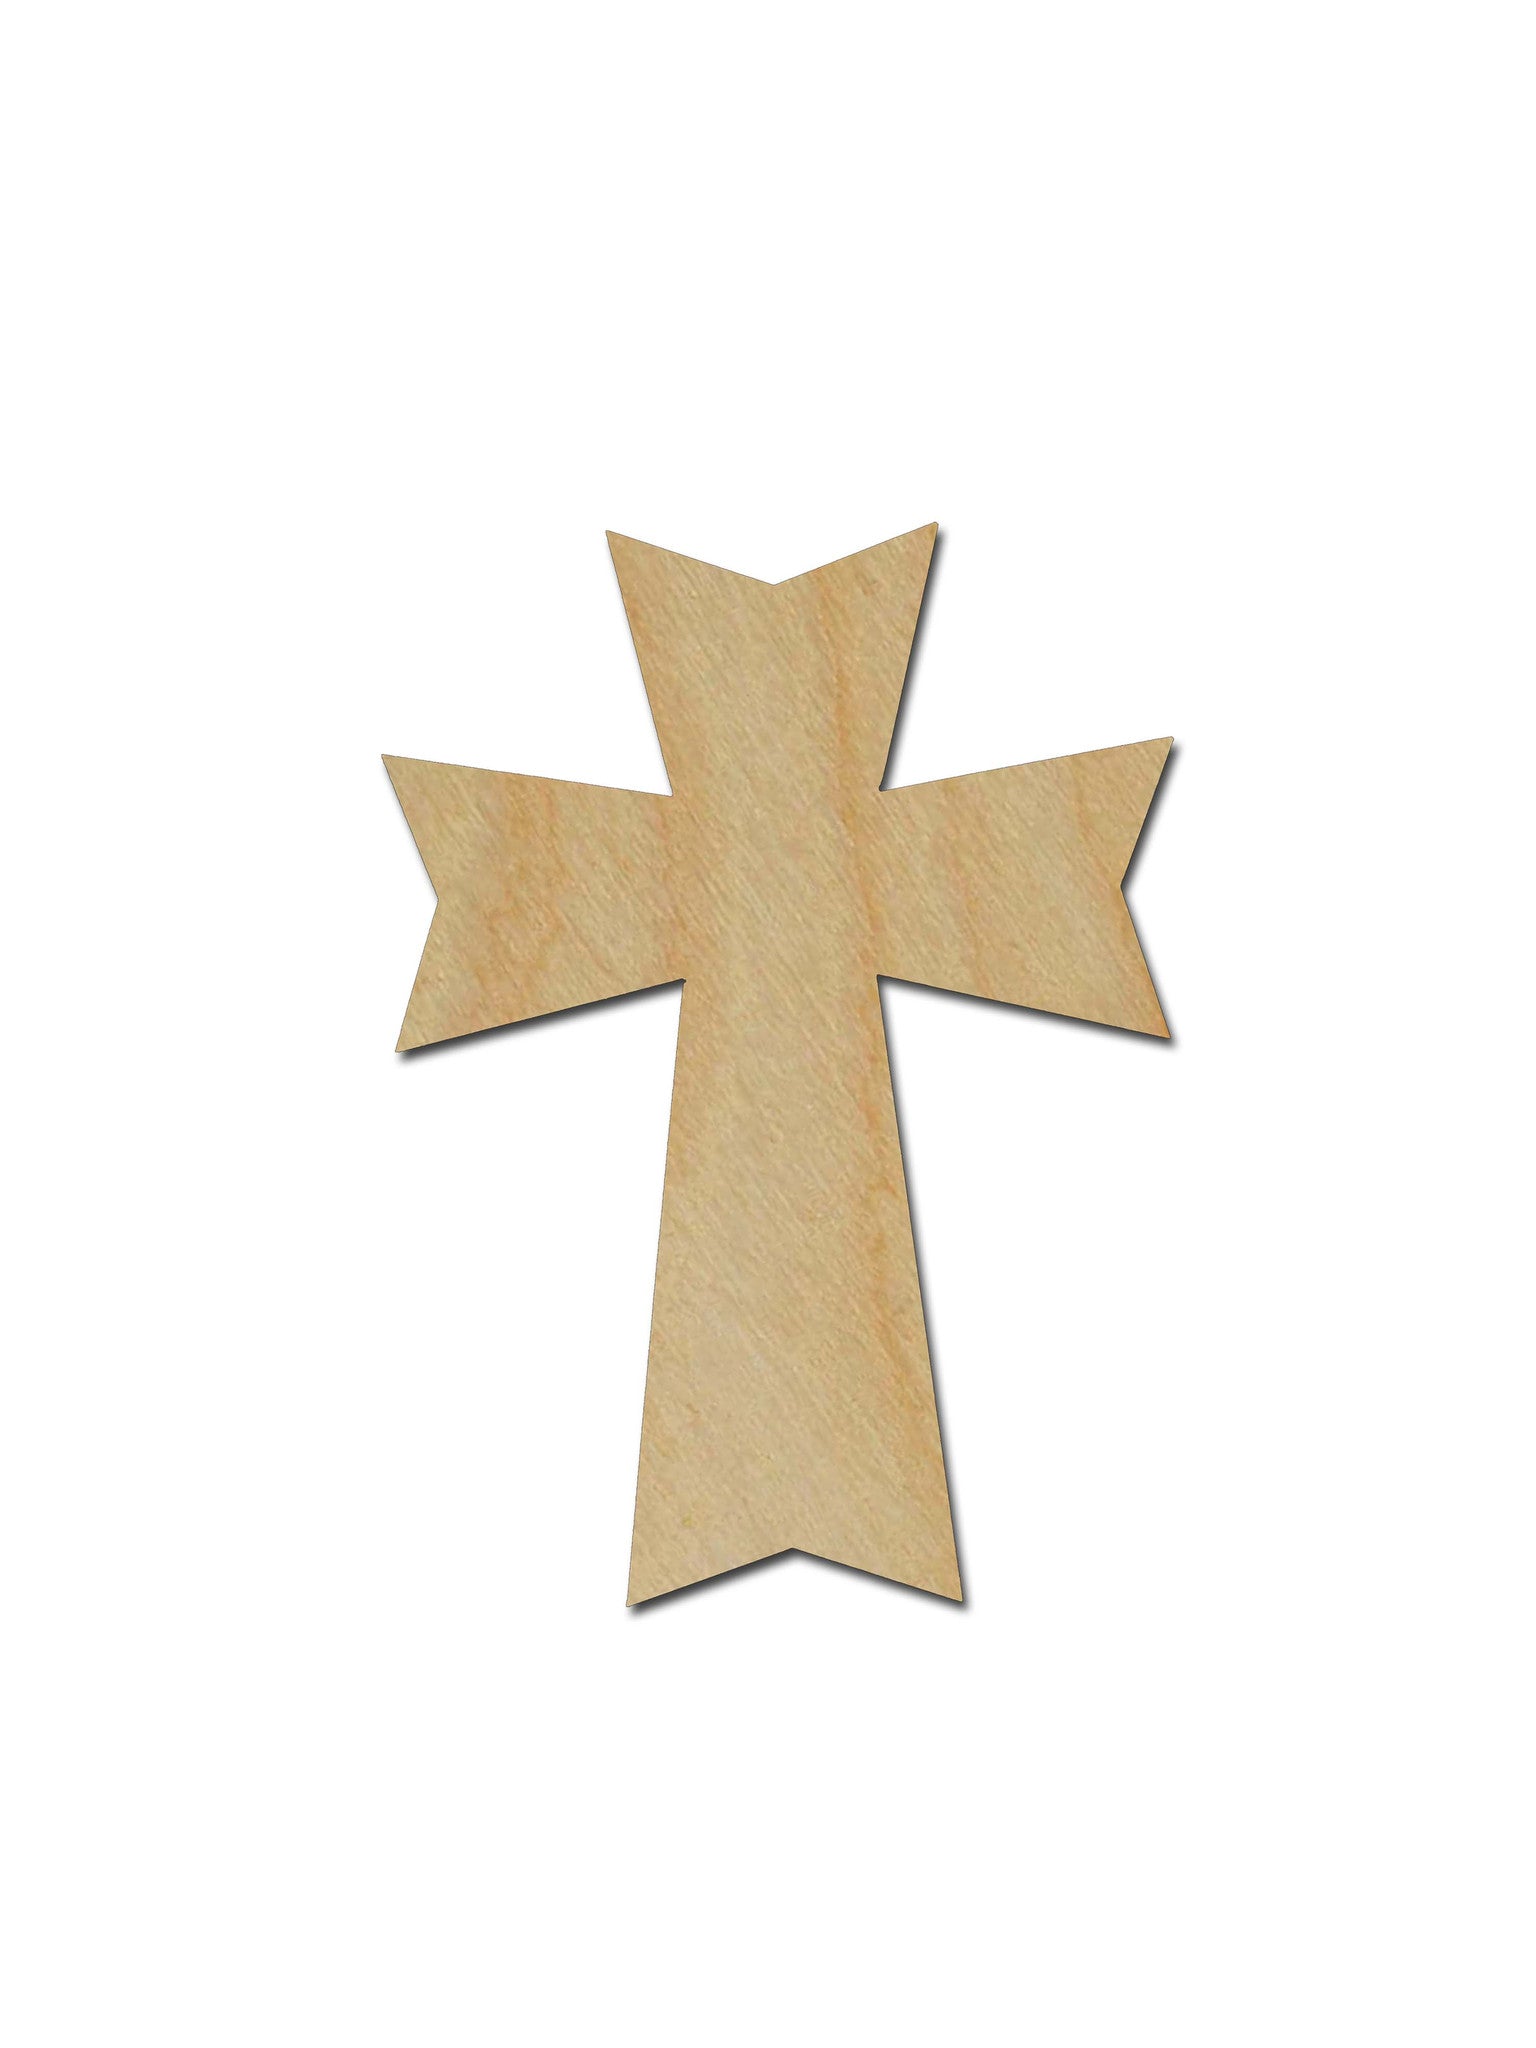 Unfinished Wood Cross Cutout MDF Craft Crosses Variety of 